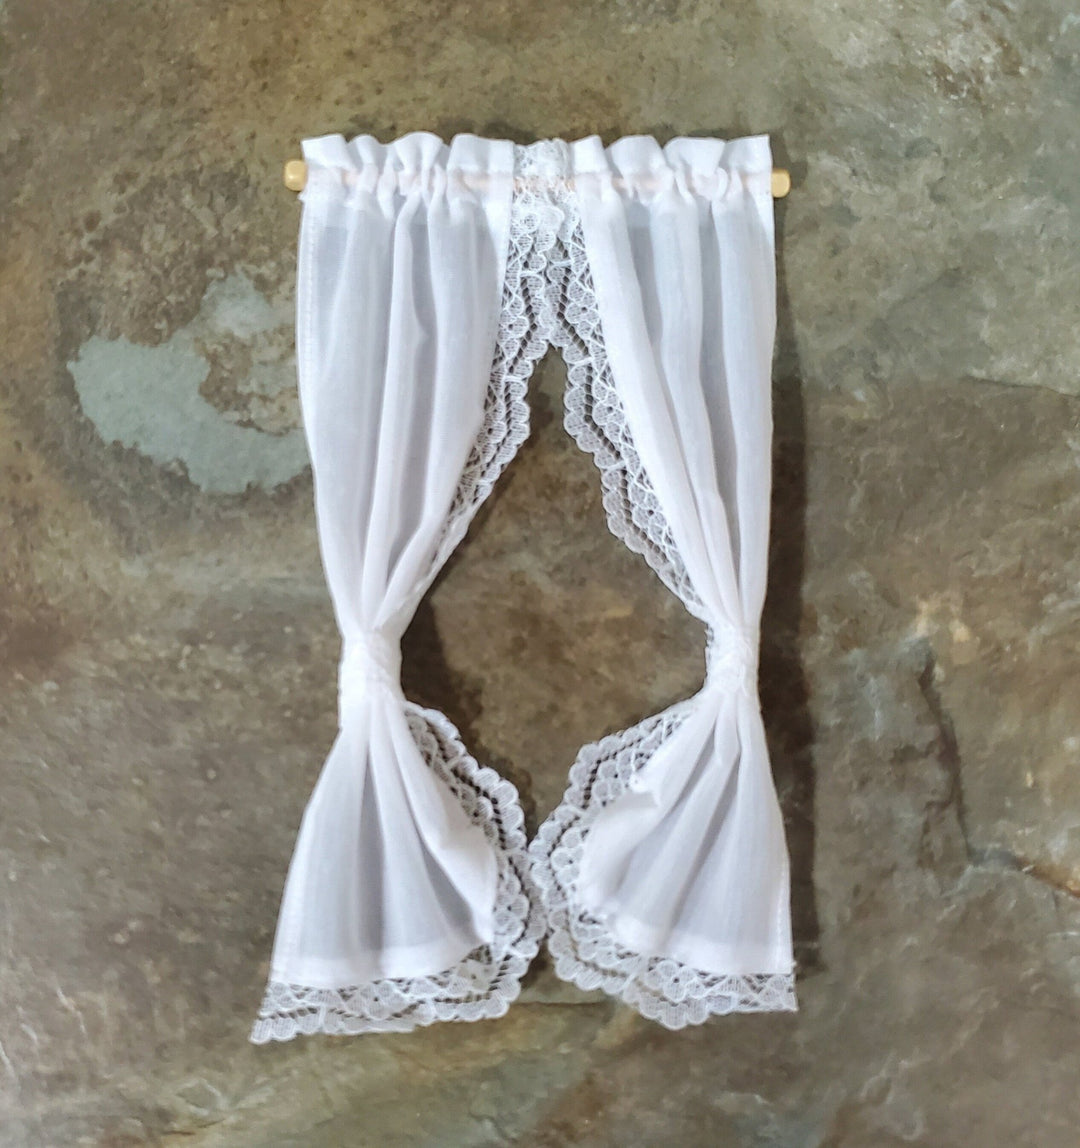 Dollhouse Curtains Fabric & Lace White Tie Back with Curtain Rod 1:12 Scale Miniatures - Miniature Crush